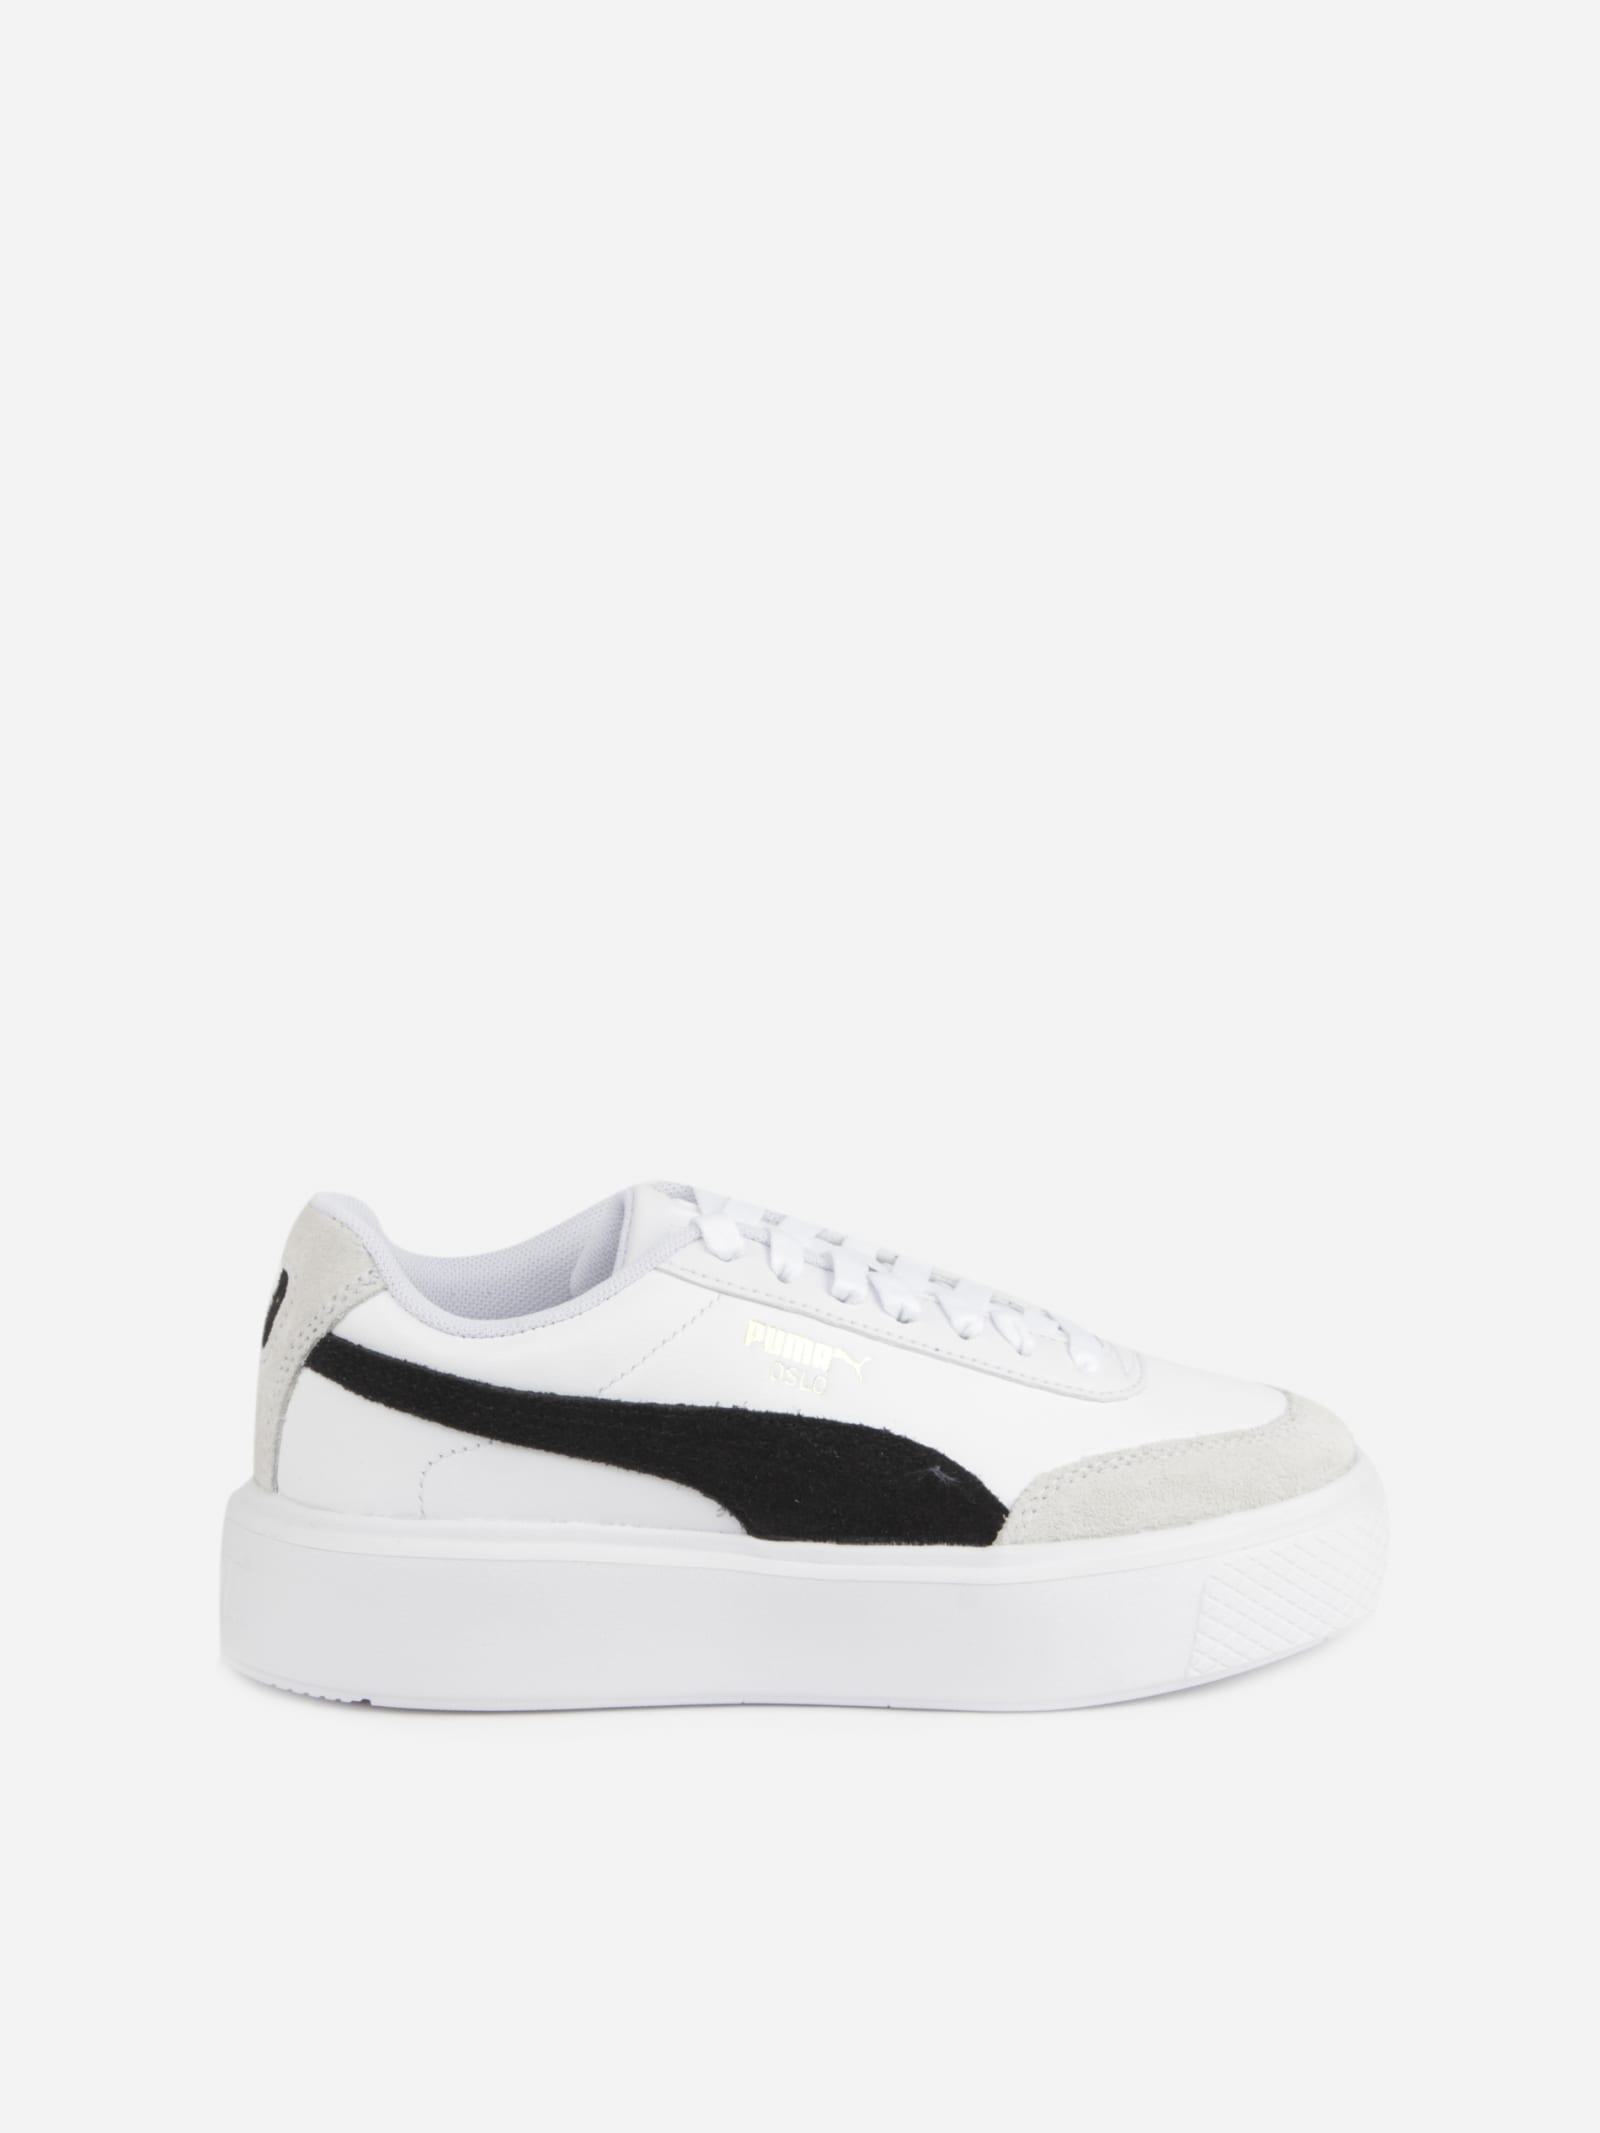 Puma Select Oslo Maja Archive Sneakers In Leather With Suede Inserts